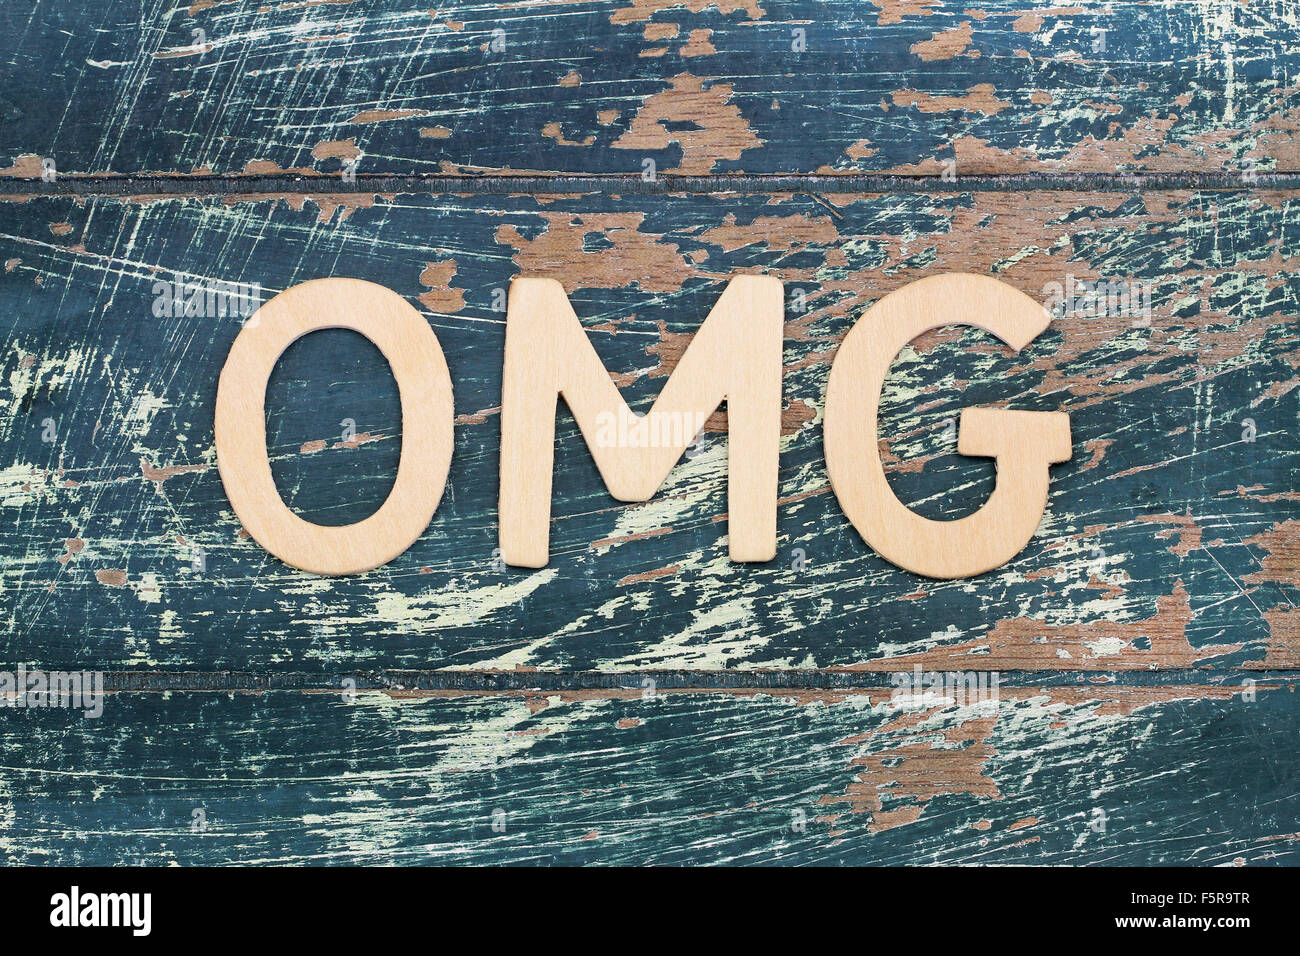 OMG letters on rustic wooden surface Stock Photo